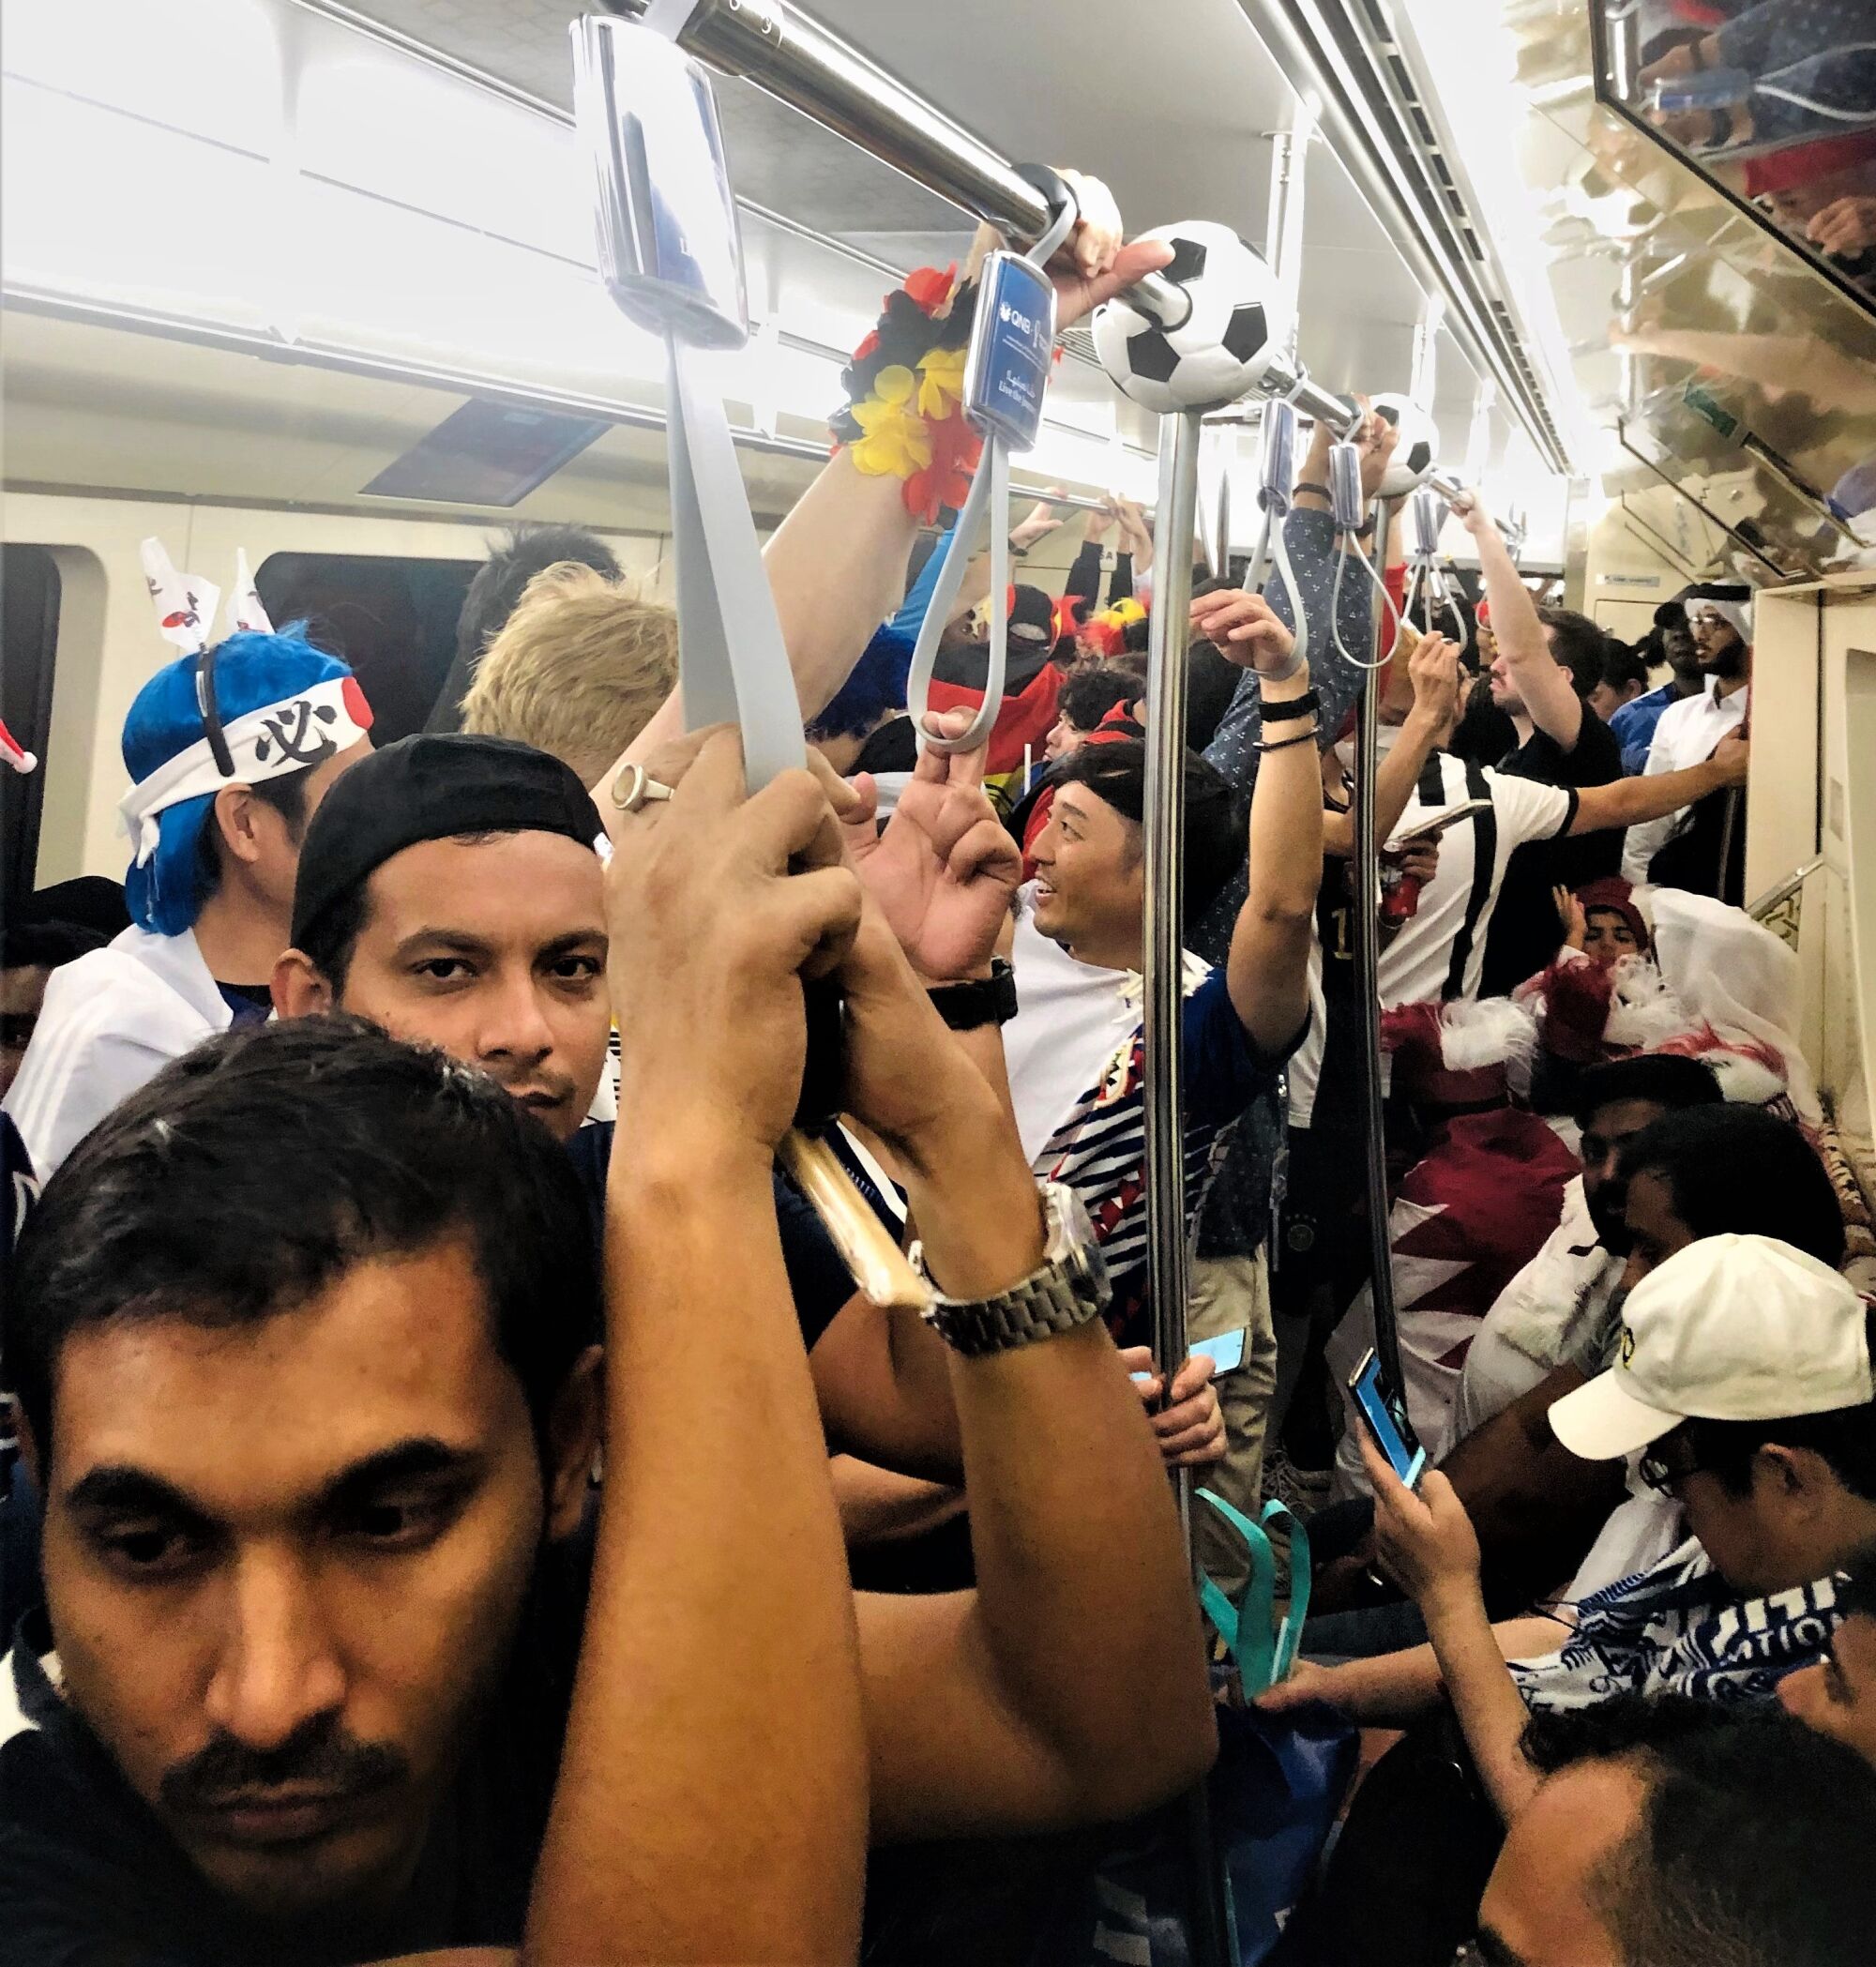 World Cup fans stand in a packed subway train in Qatar on Wednesday.